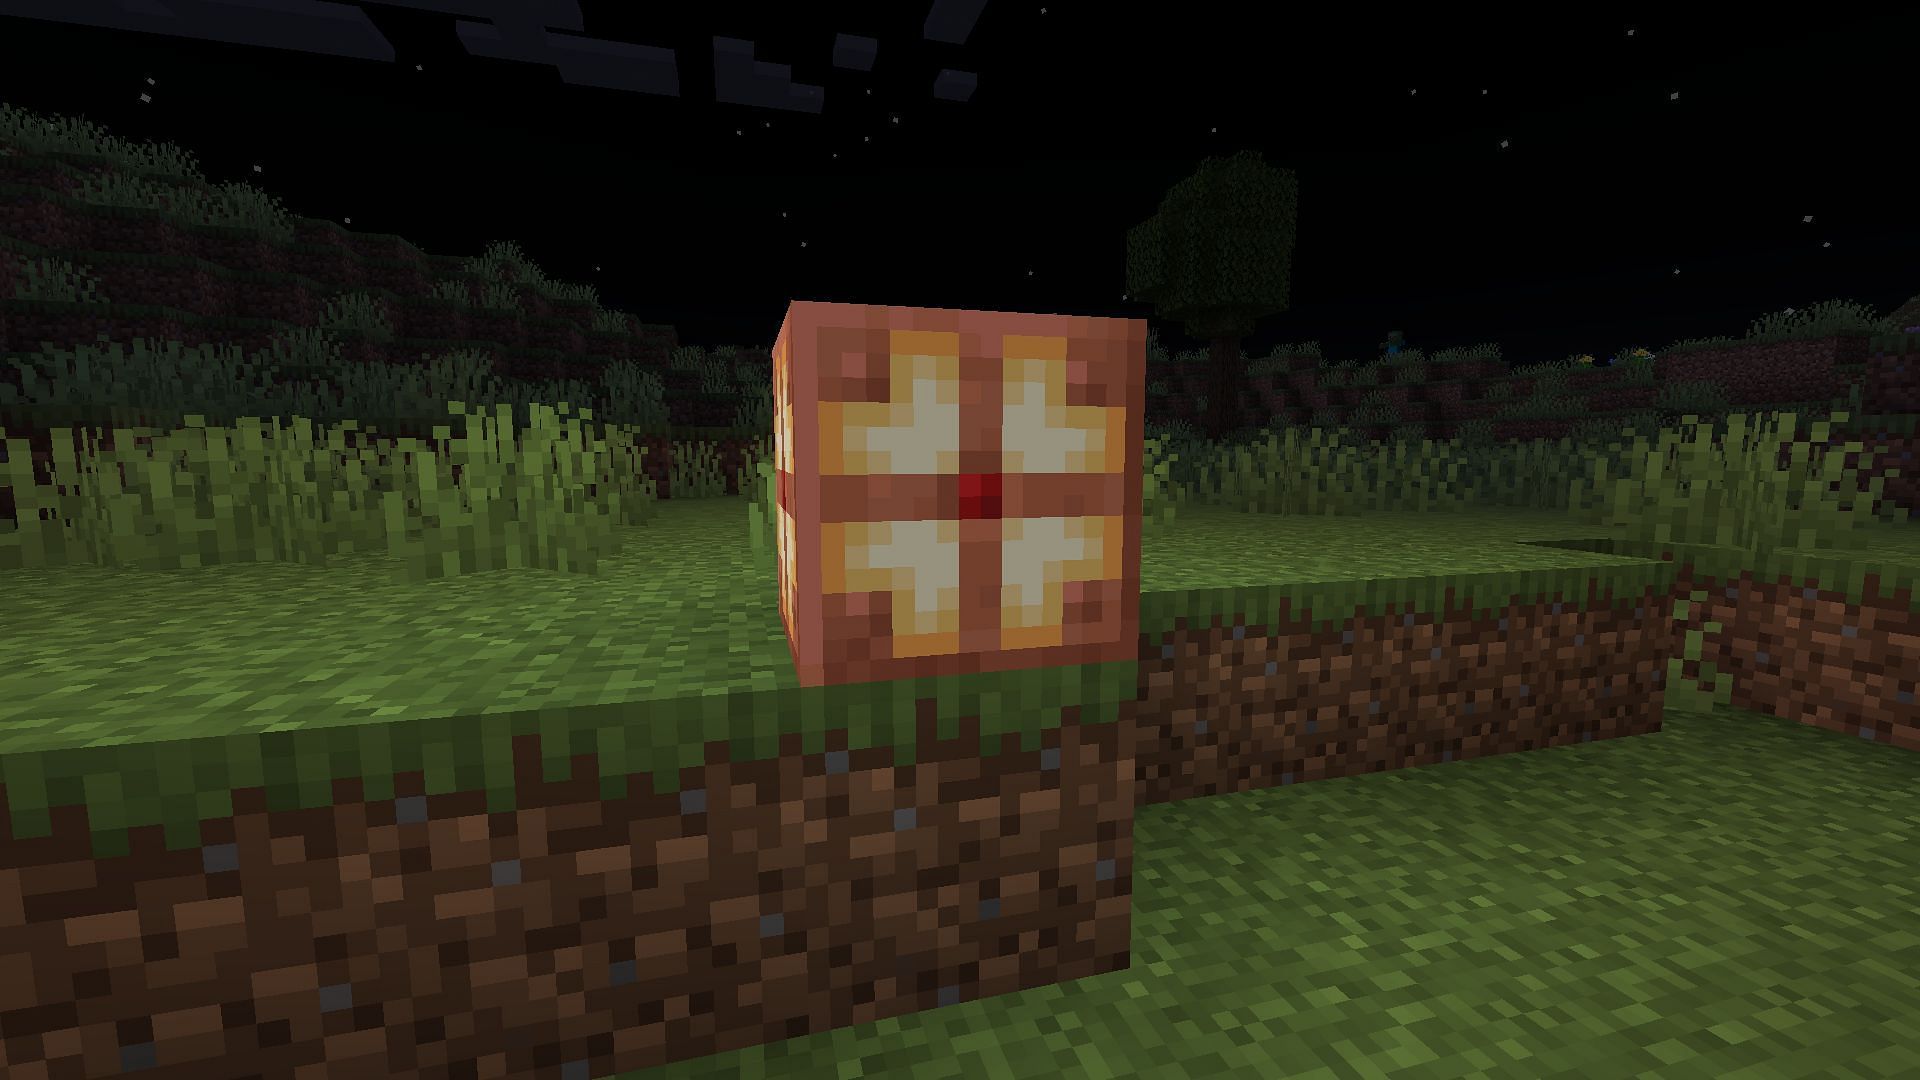 Copper bulbs will be fully implemented in Minecraft